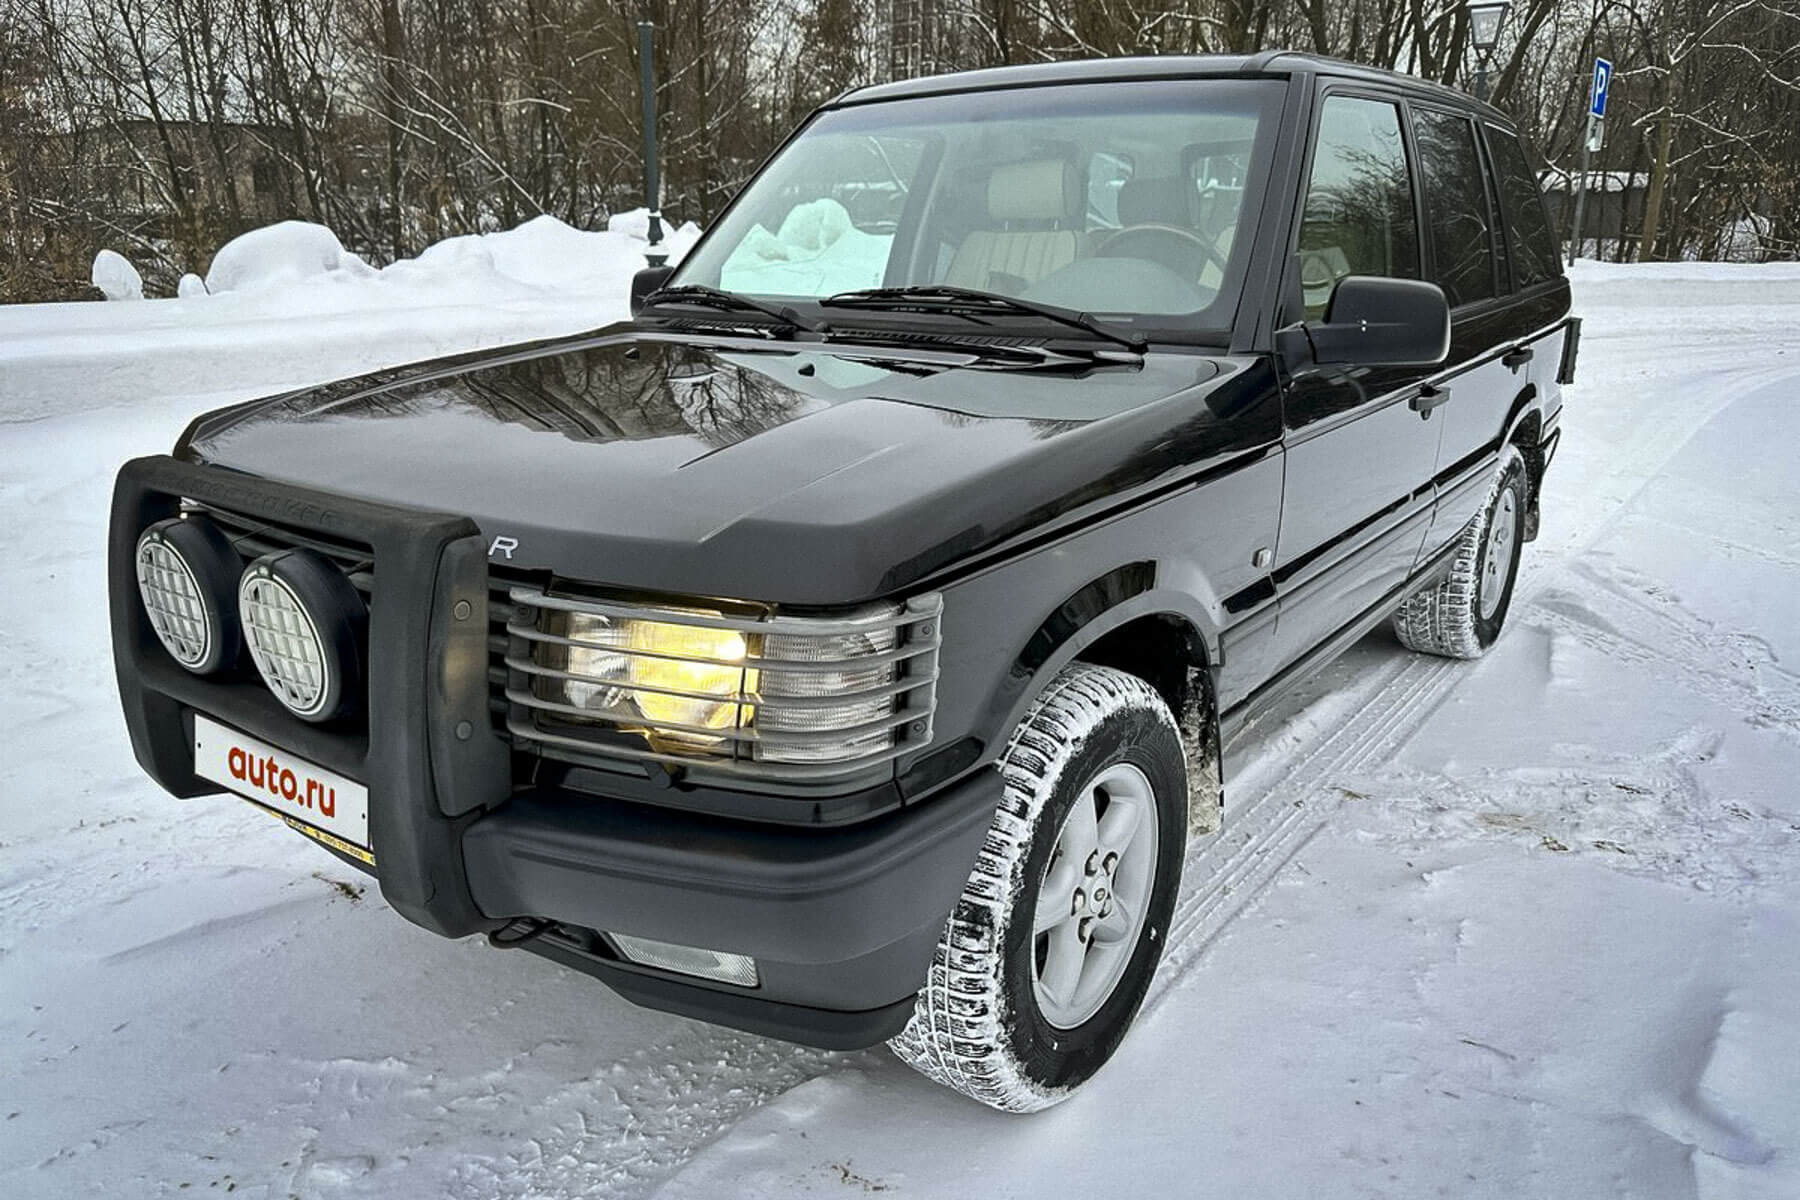 Almost new Land Rover Range Rover 2001 is being sold in Moscow